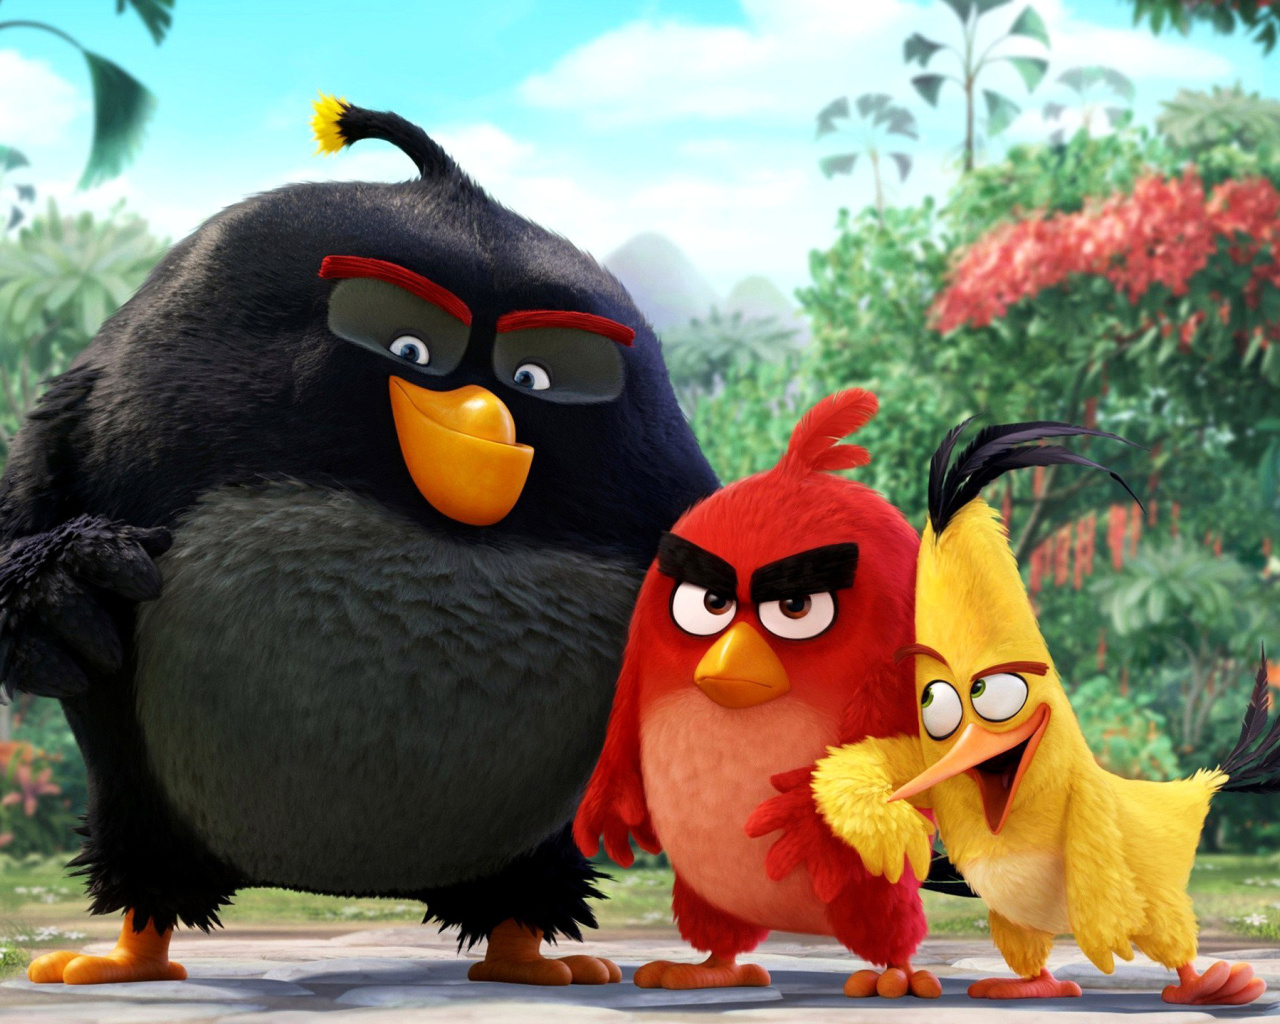 The Angry Birds Comedy Movie 2016 wallpaper 1280x1024